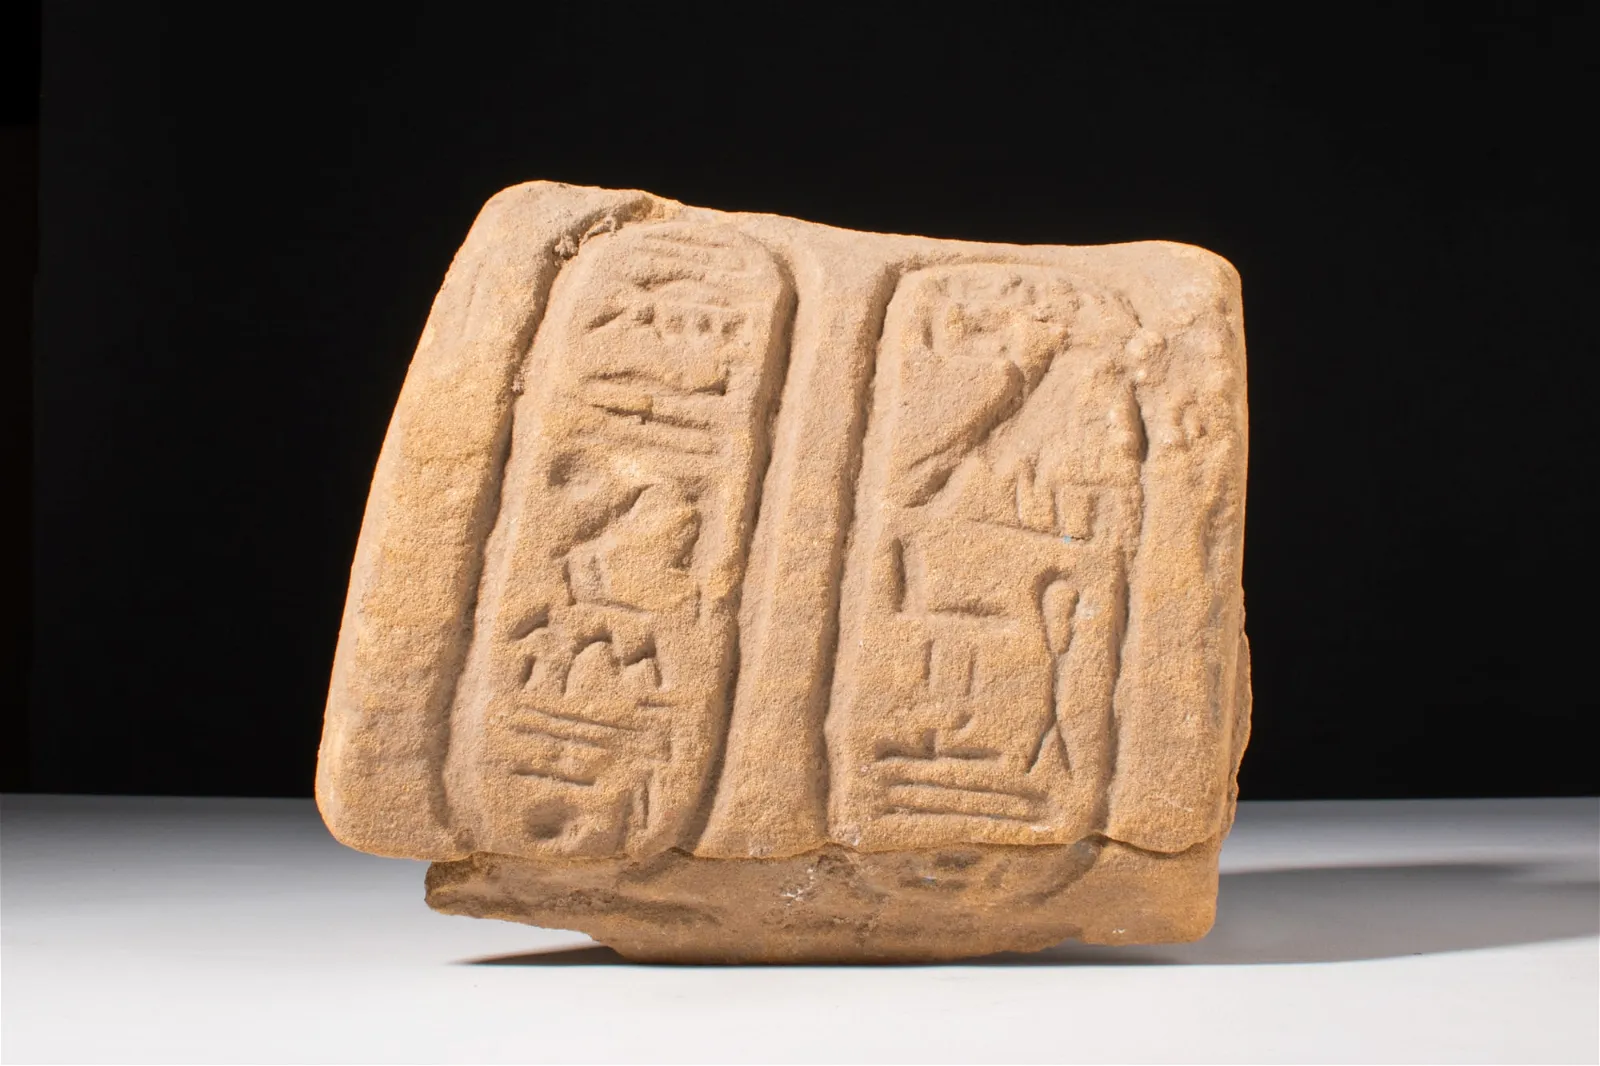 Sandstone bracelet fragment from a once colossal statue of Akhenaten, circa 1352-1336 BC, which sold for £11,000 (£13,750 or $17,440 with buyer’s premium) at Apollo Art Auctions.